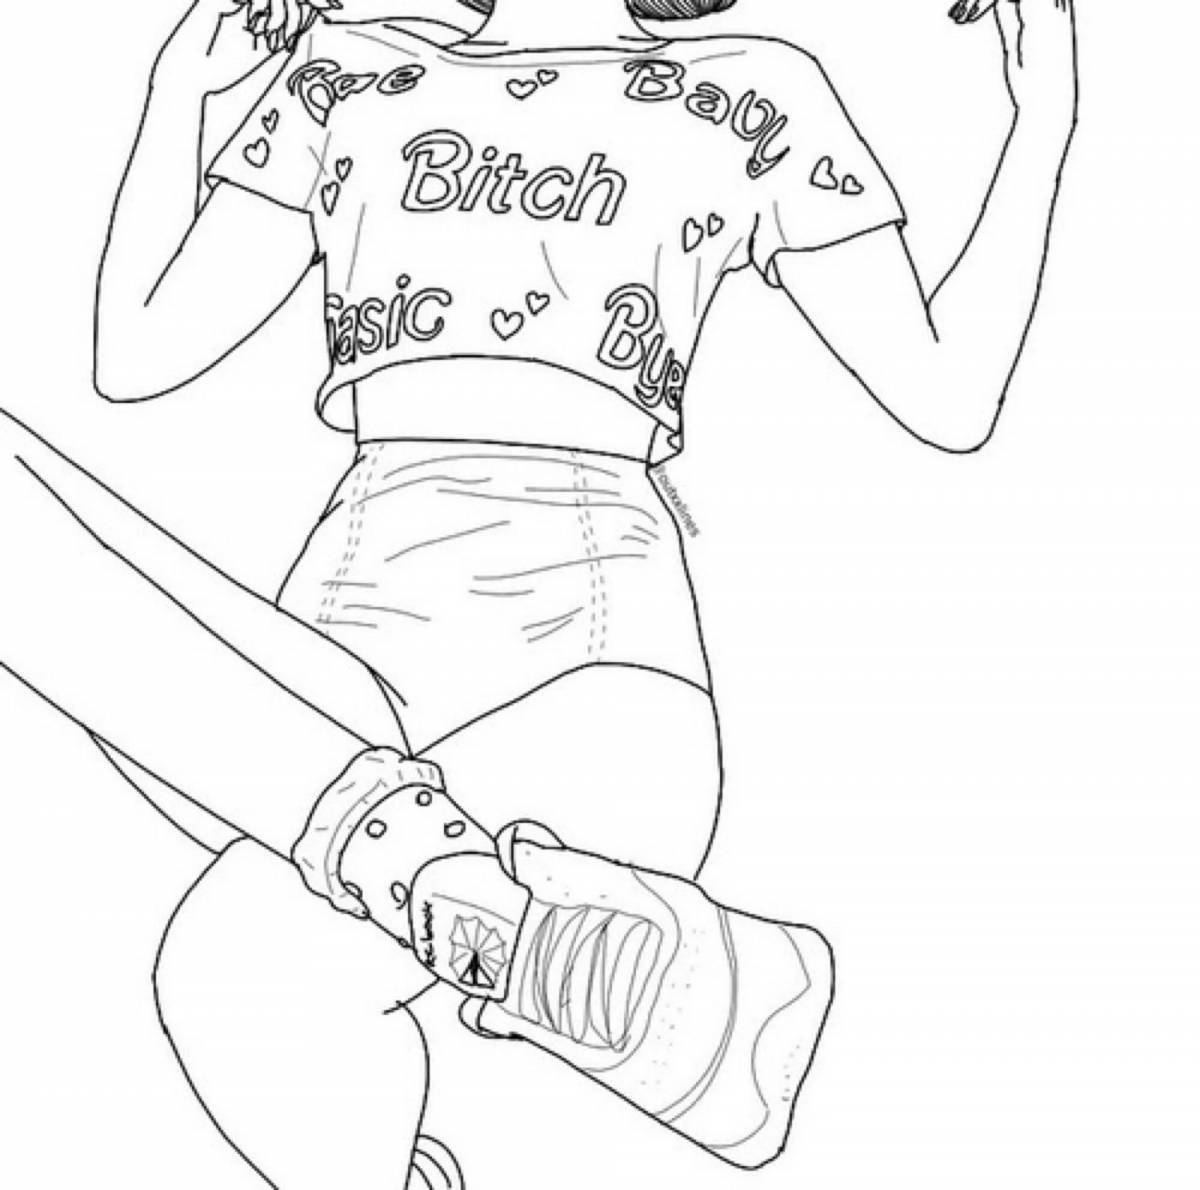 Comic coloring page 18 plus vulgarity